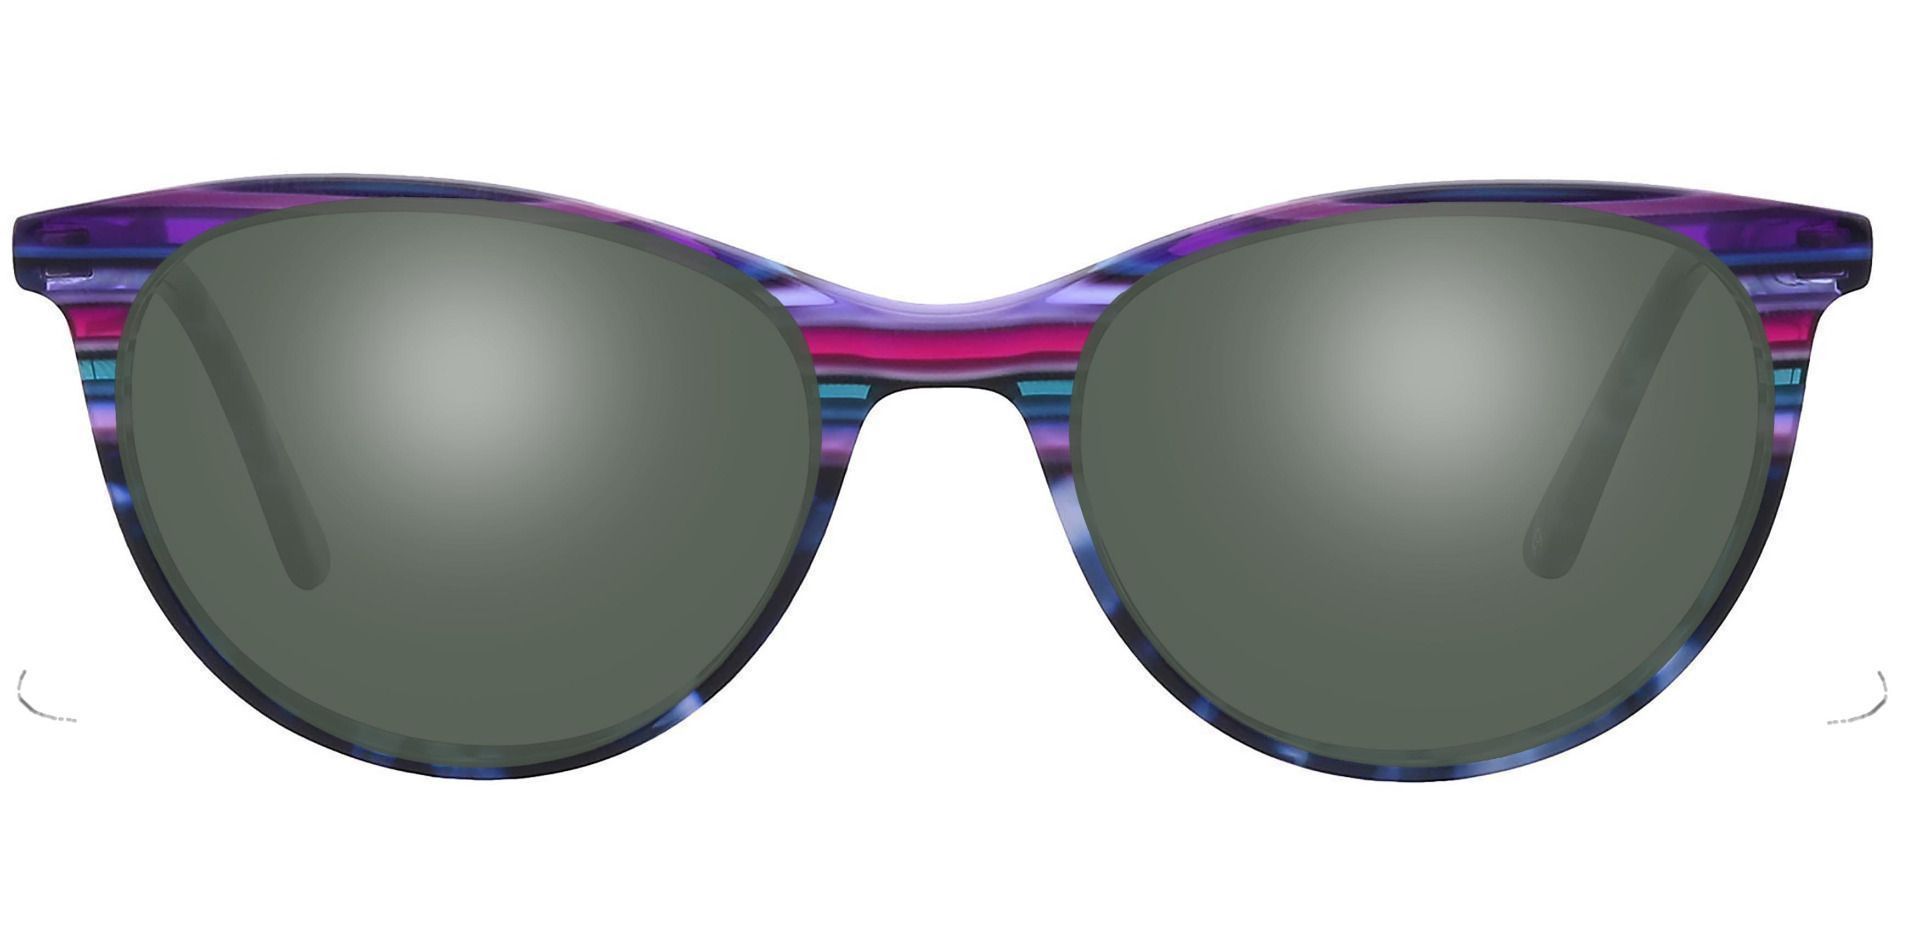 Patagonia Oval Prescription Sunglasses - Purple Frame With Green Lenses ...